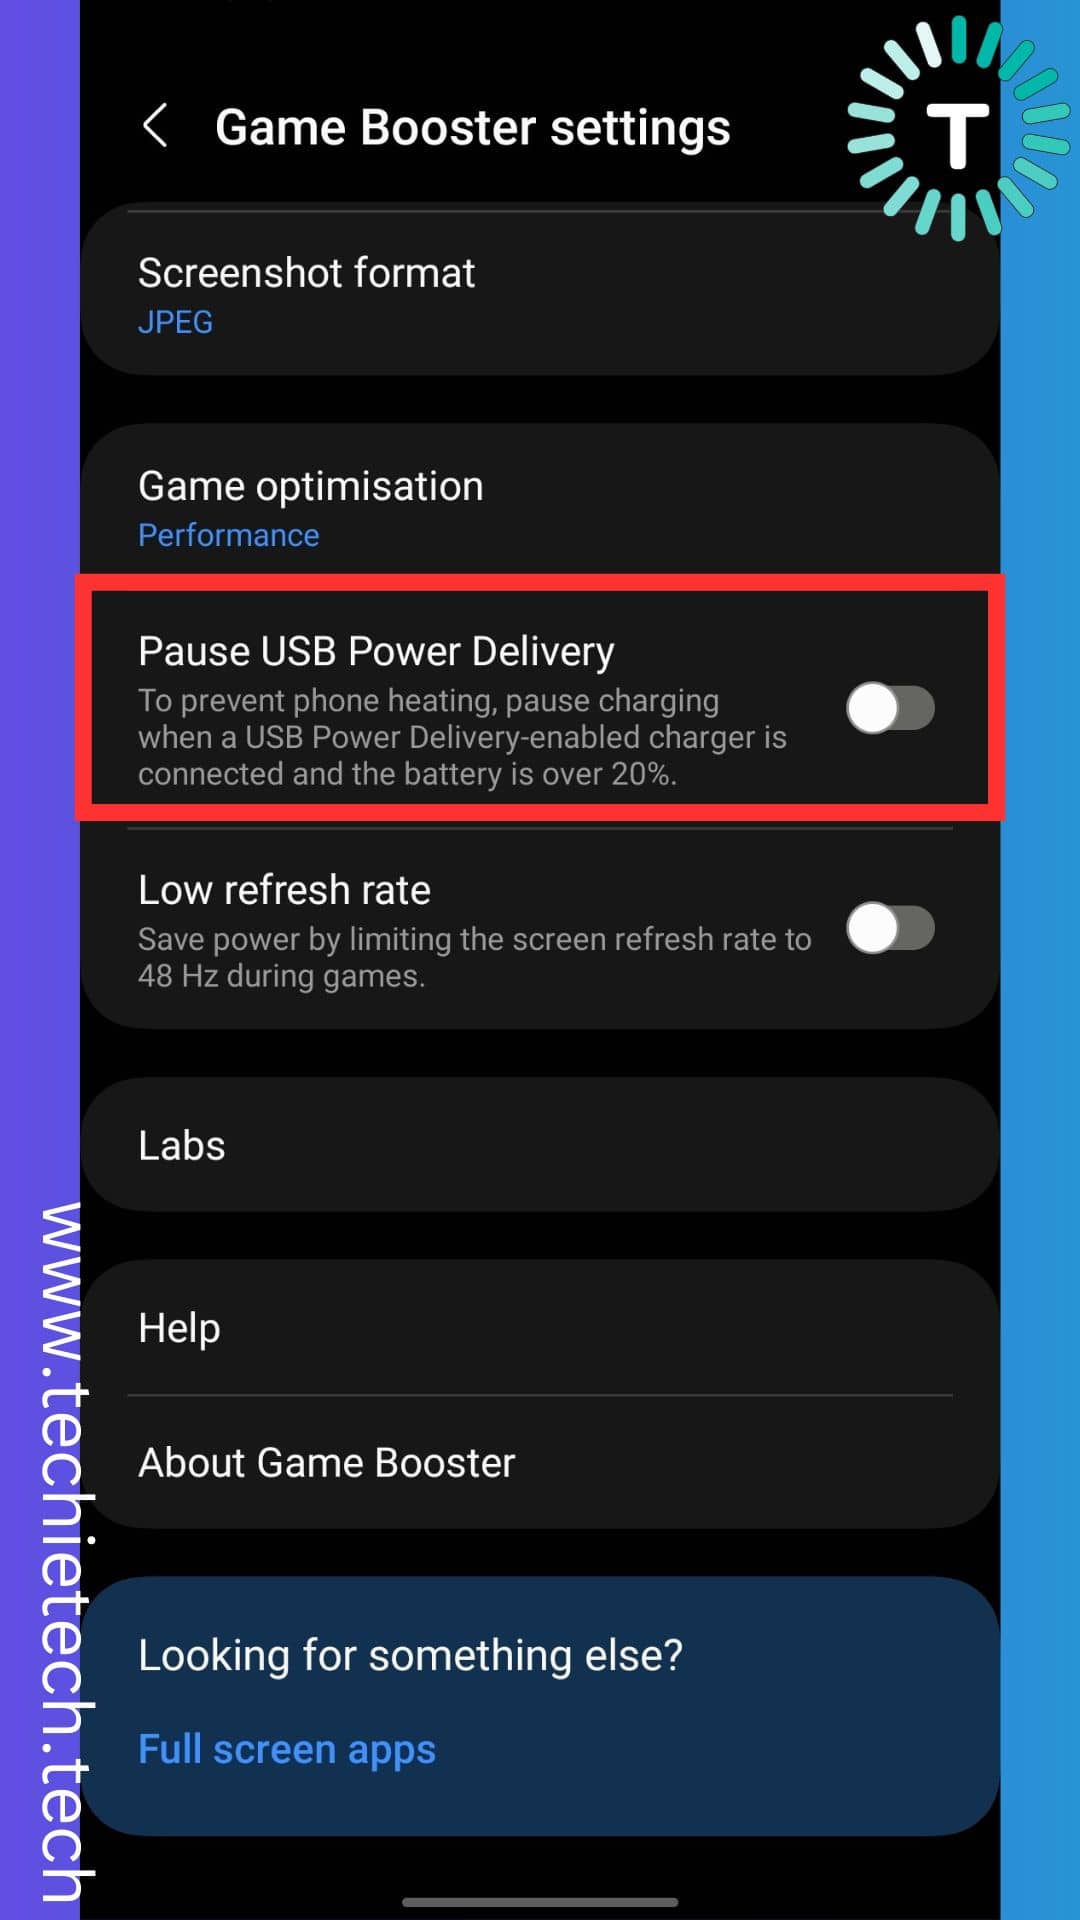 Toggle on the “Pause USB Power Delivery”